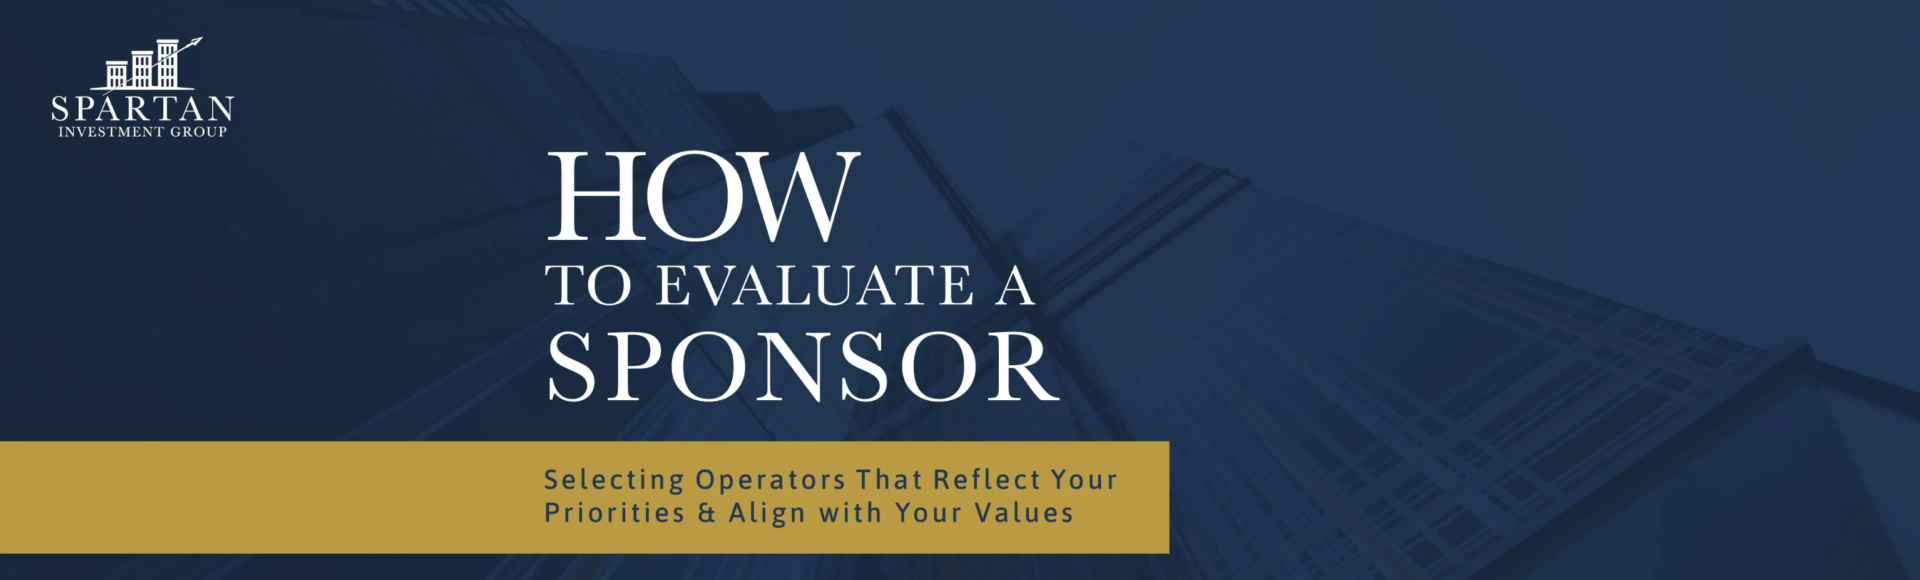 Featured image for How to Evaluate a Sponsor